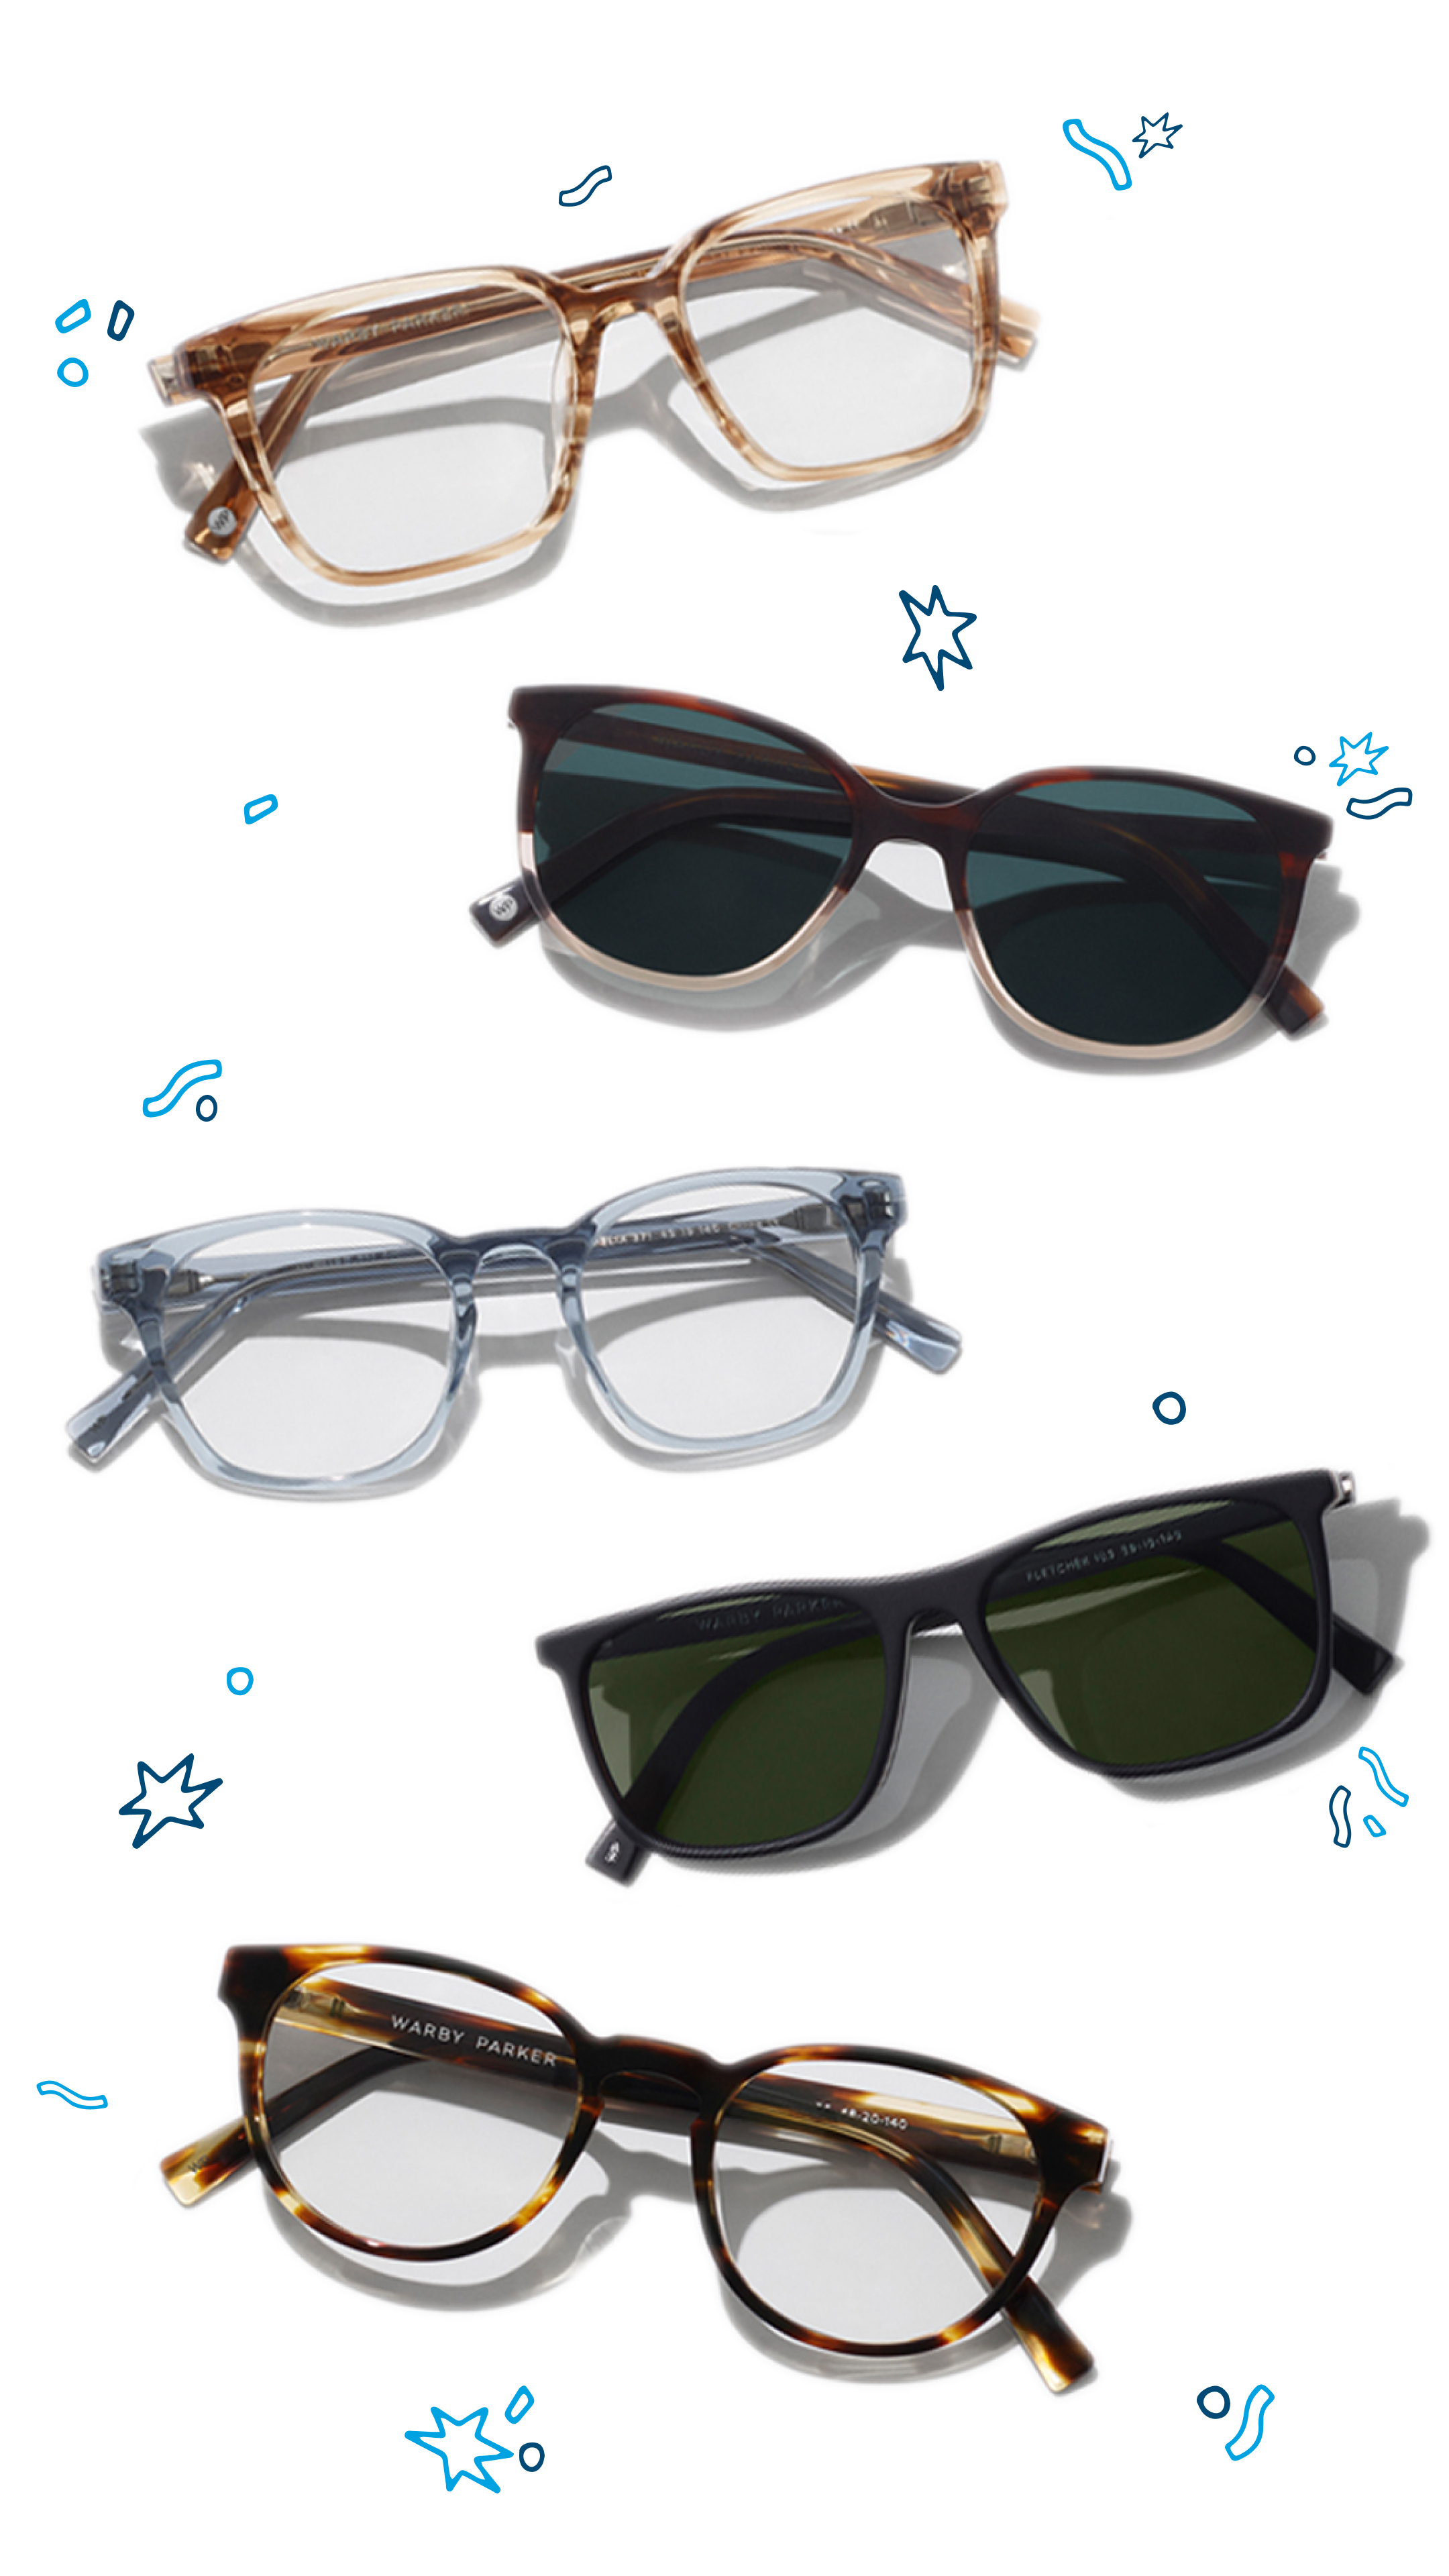 Add a pair and Save from Warby Parker